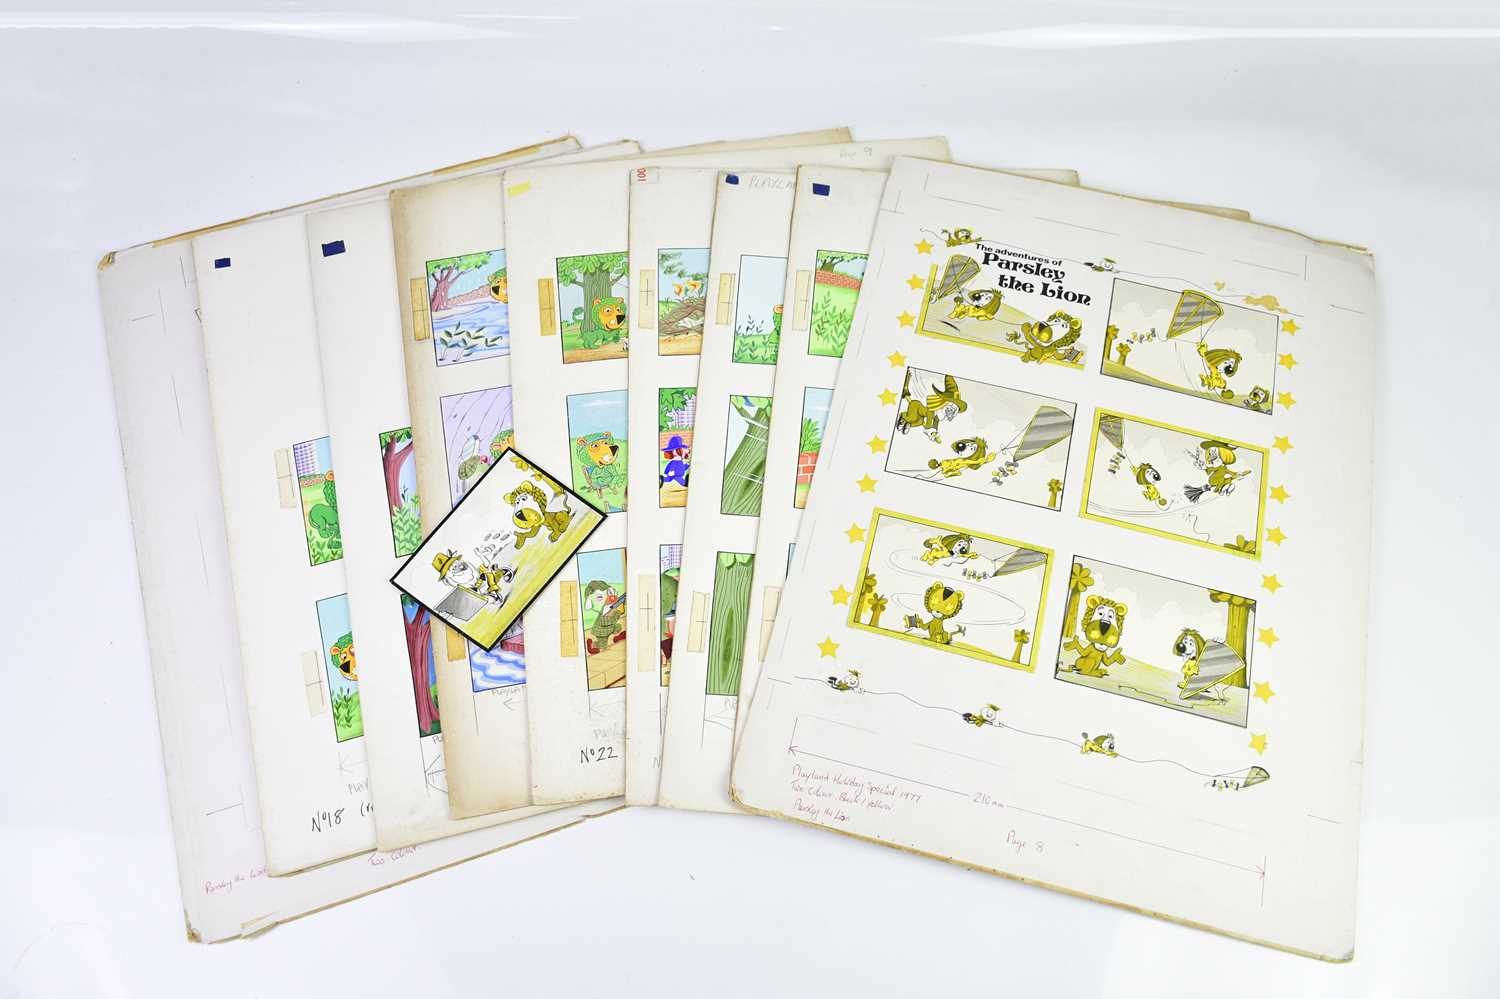 † BILL MEVIN; a group of ten original storyboard cartoons for The Herbs, some with annotated